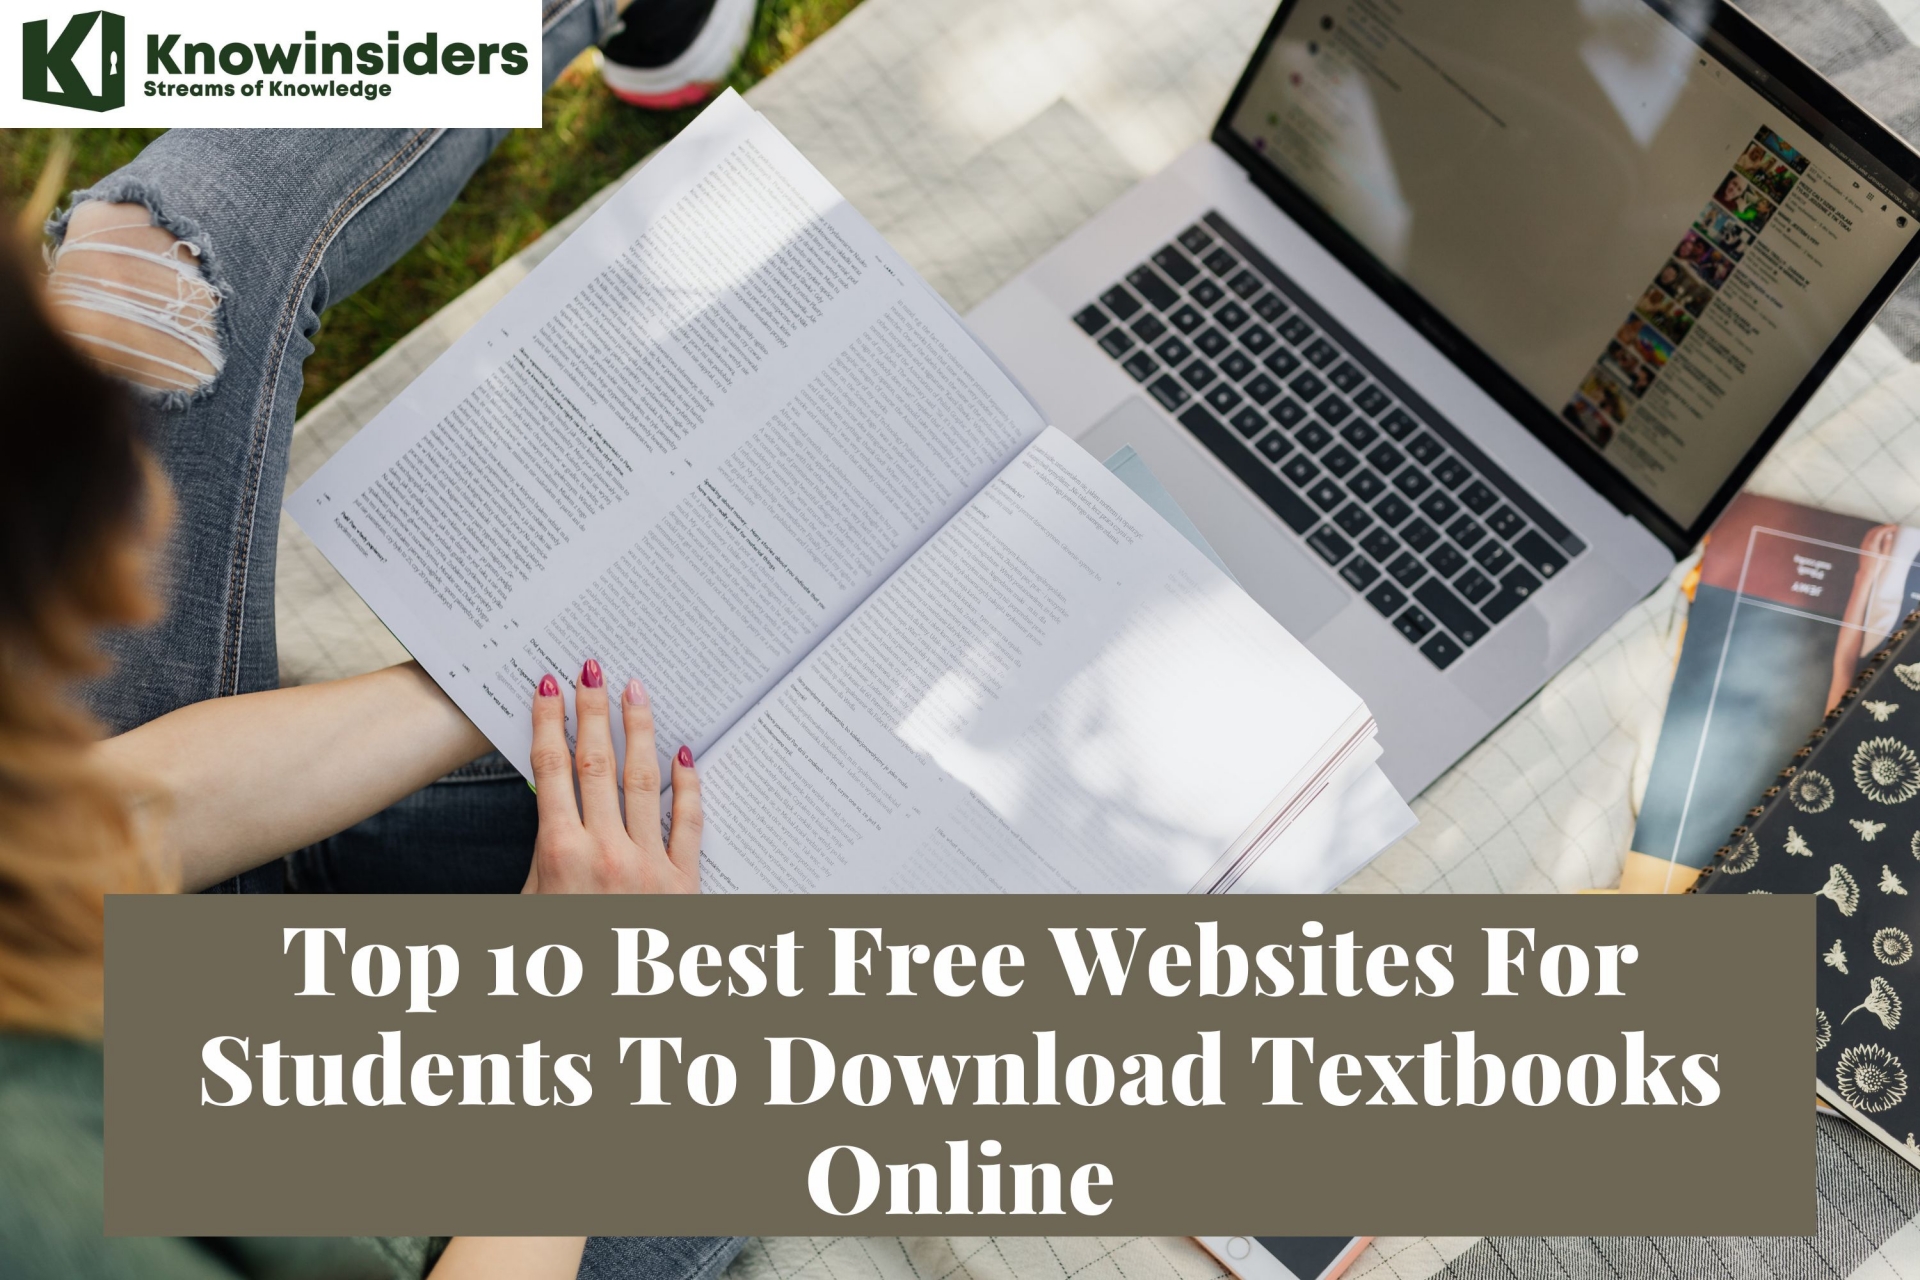 Top 10 Best Free Websites For Students To Download Textbooks Online